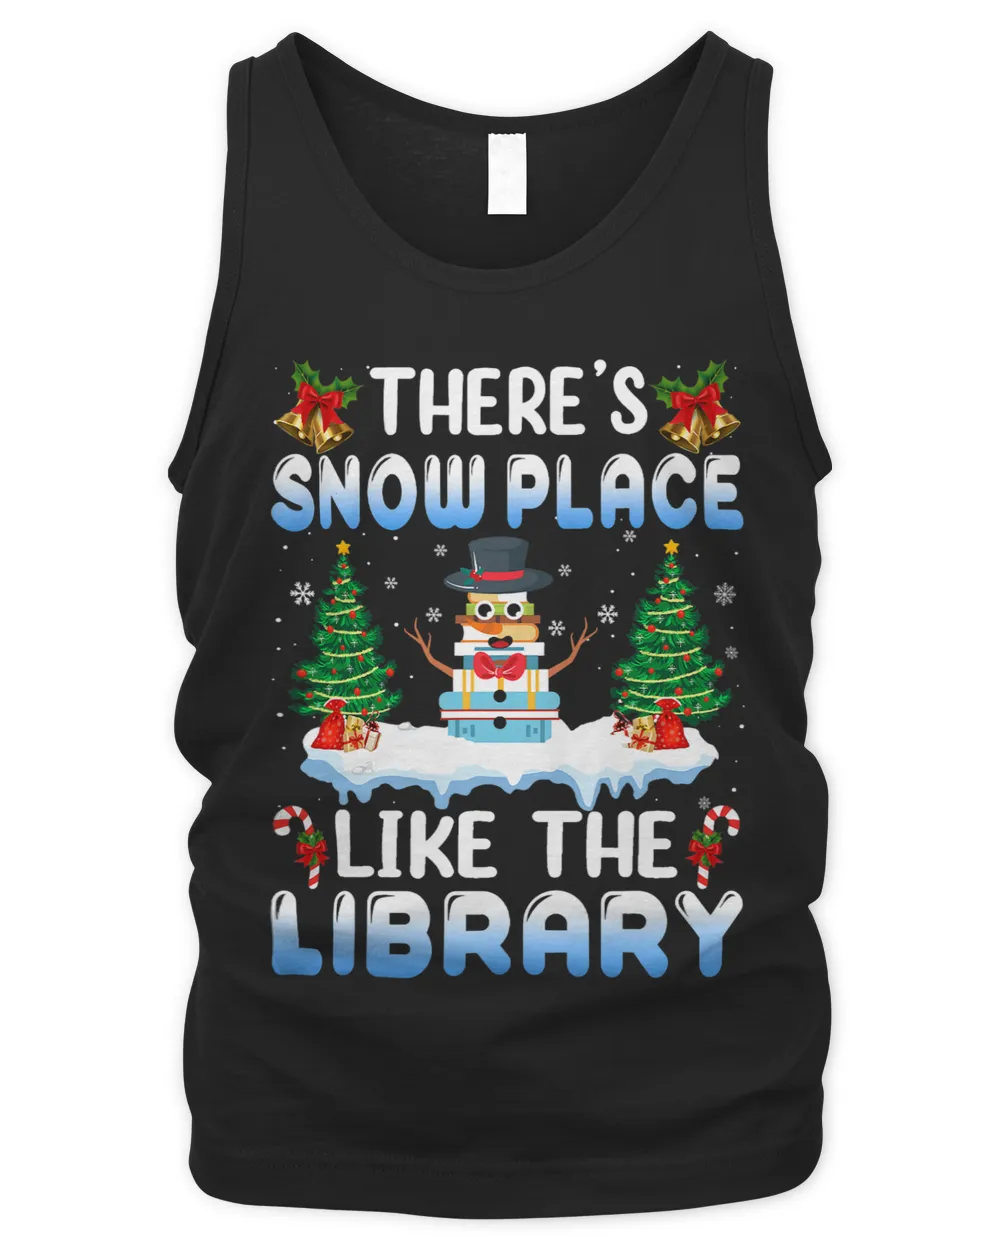 Librarian Job Theres Snow Place Like The Library Christmas Snow 1